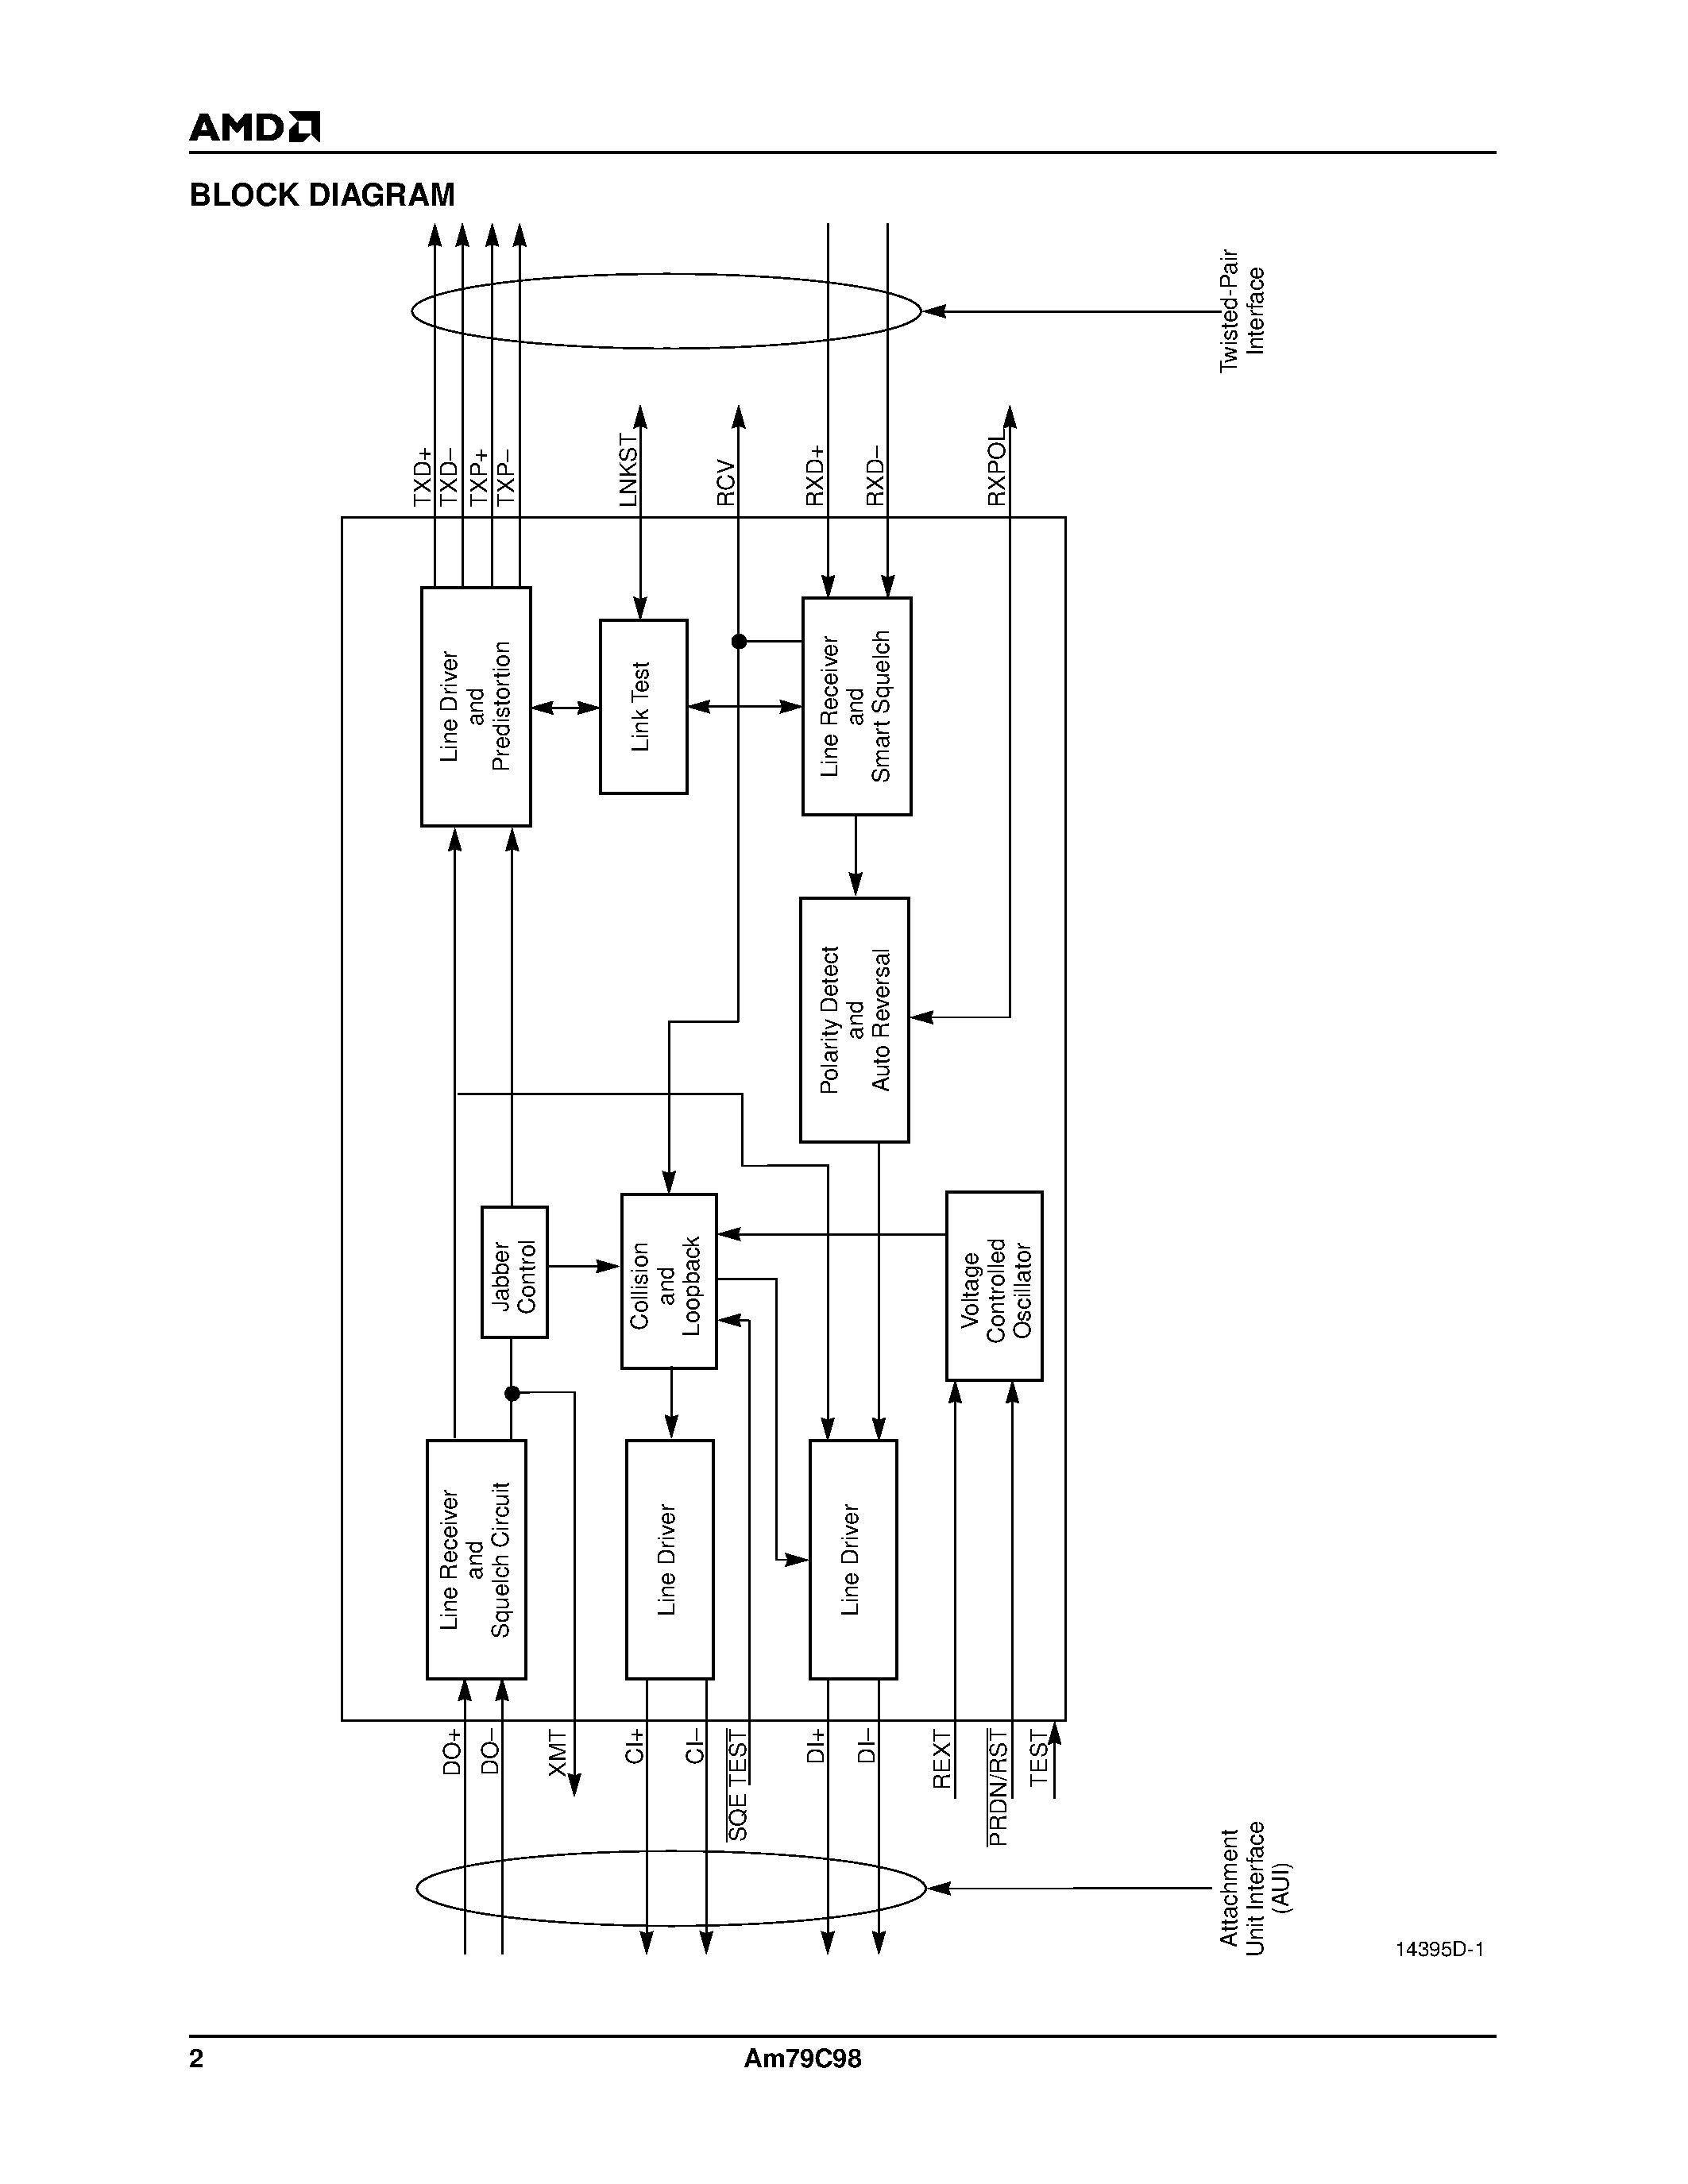 Datasheet AM79C98PC - Twisted-Pair Ethernet Transceiver (TPEX) page 2